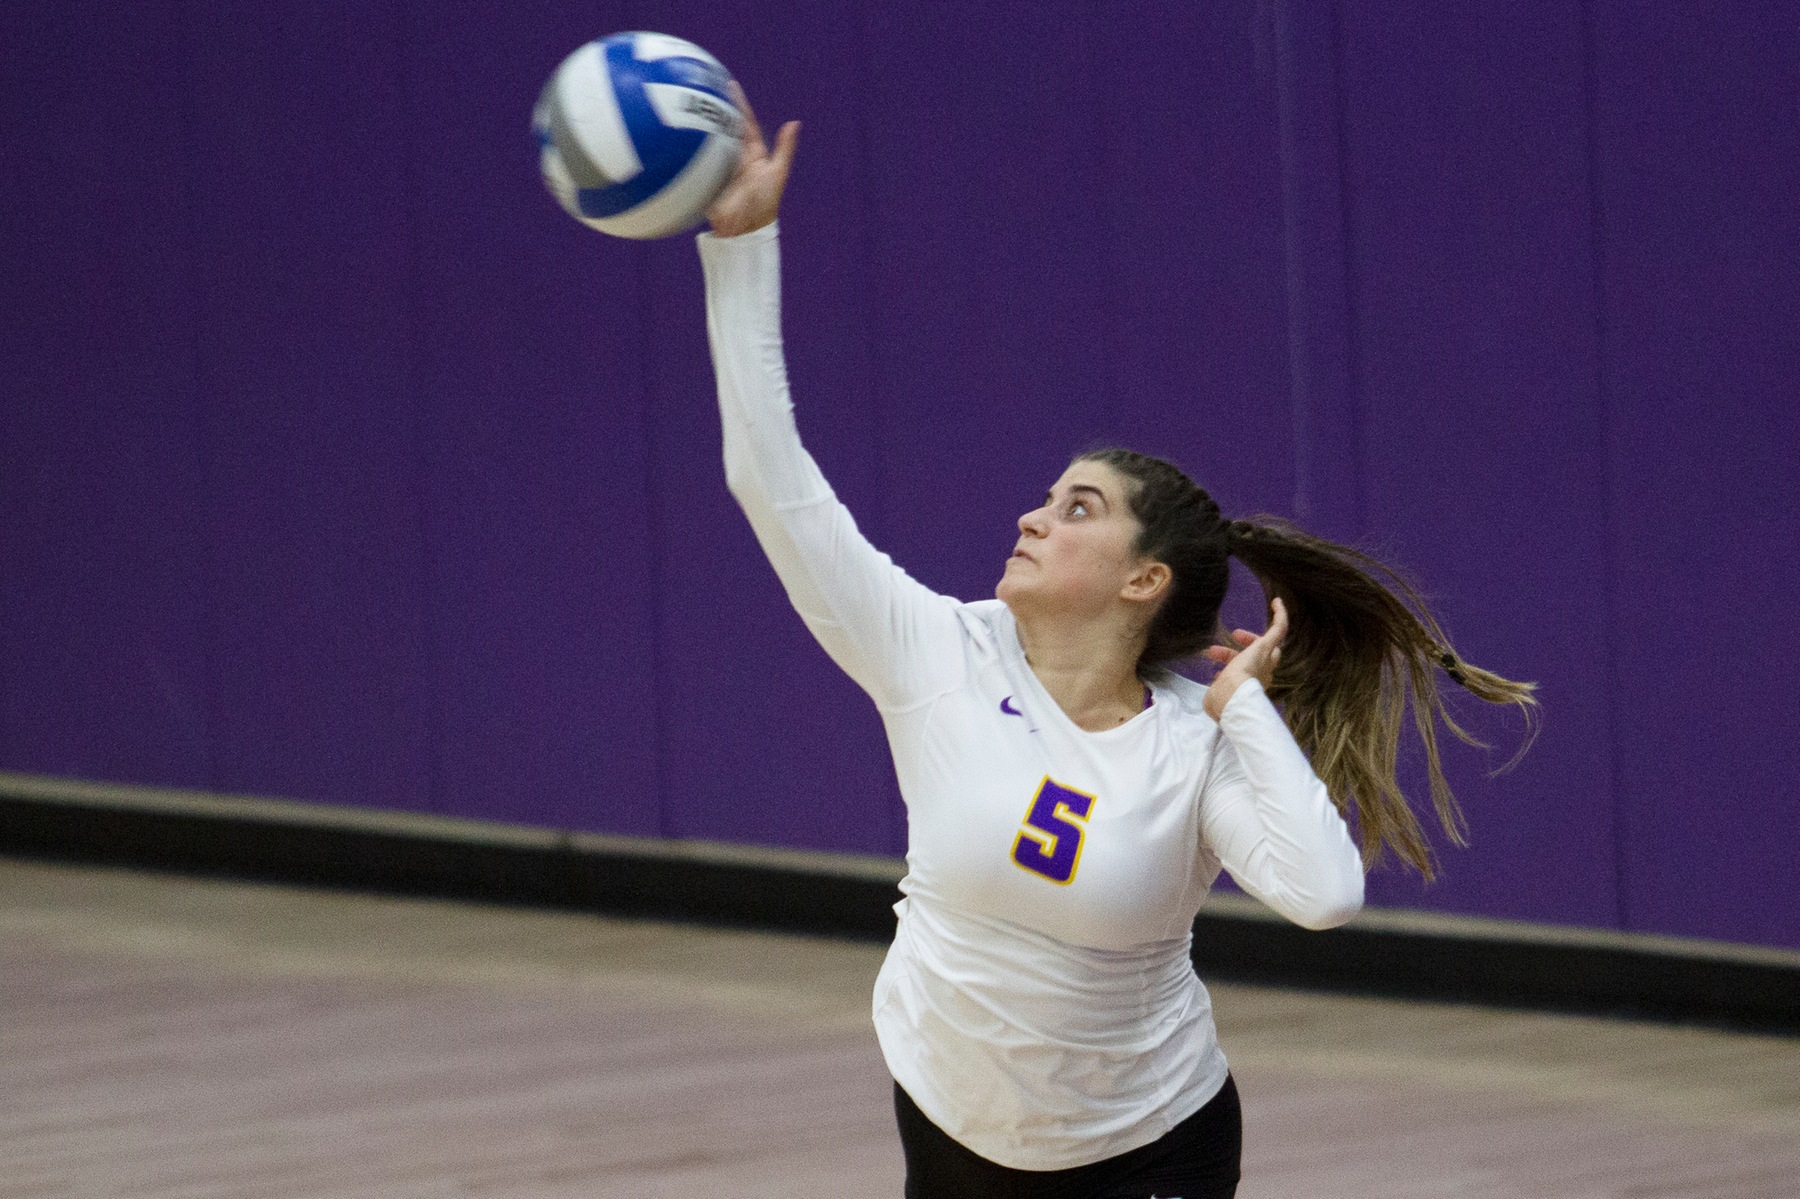 Regals Record Highest Attack Percentage This Season; Sweep Oxy